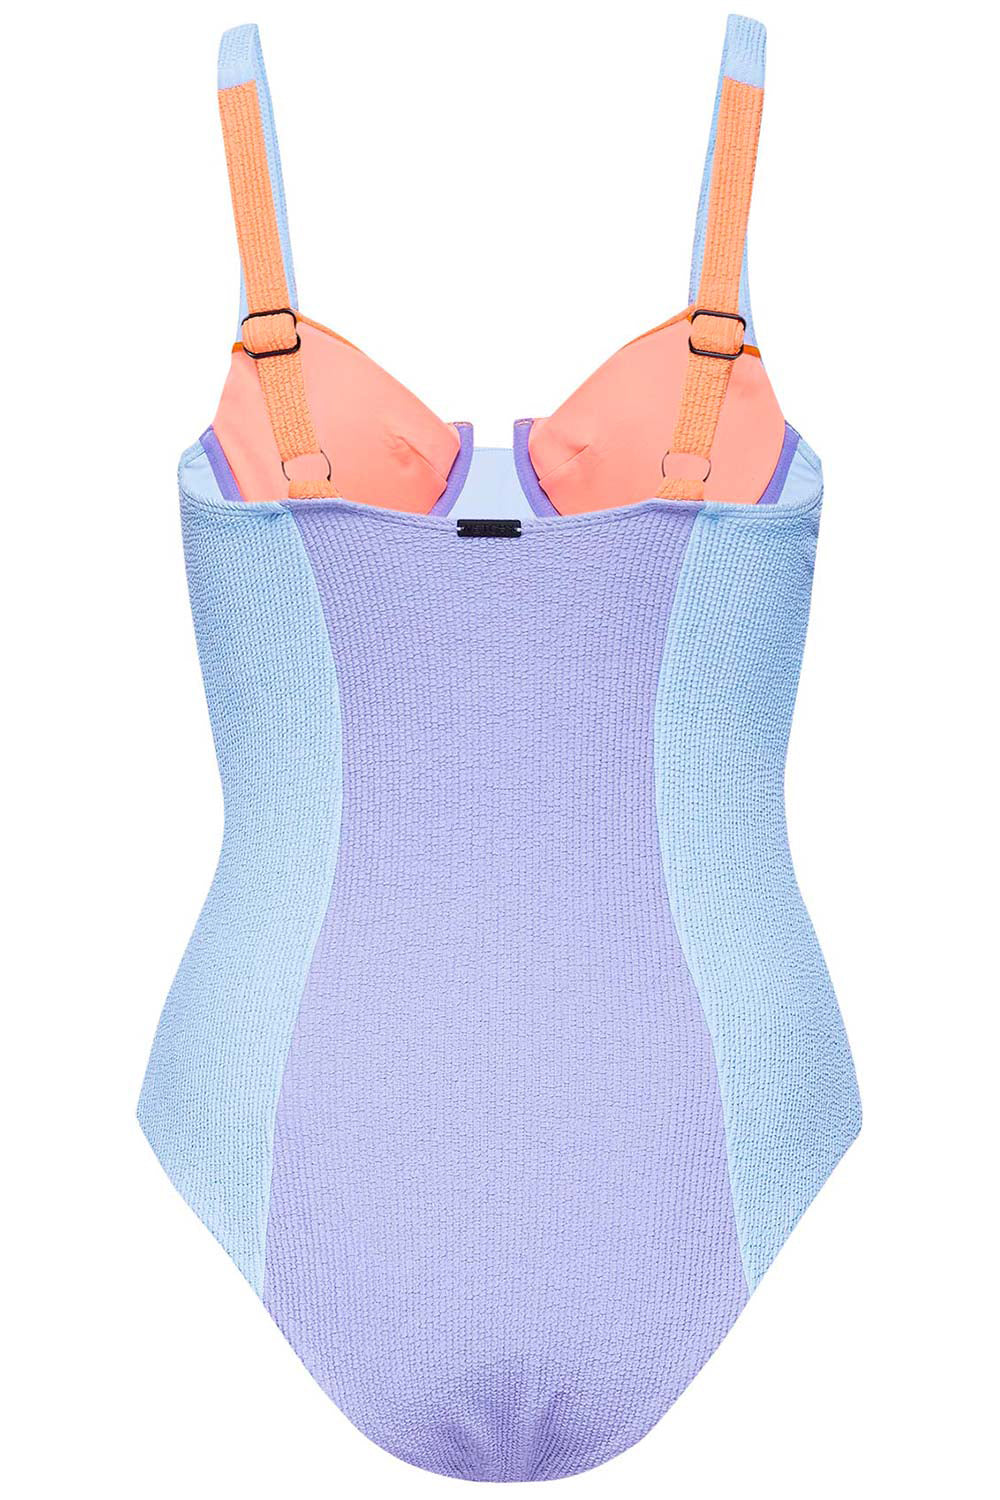 VKEKIEO Two-Piece Sets Swimsuit Halter Bra Style Soft Cup Blue M